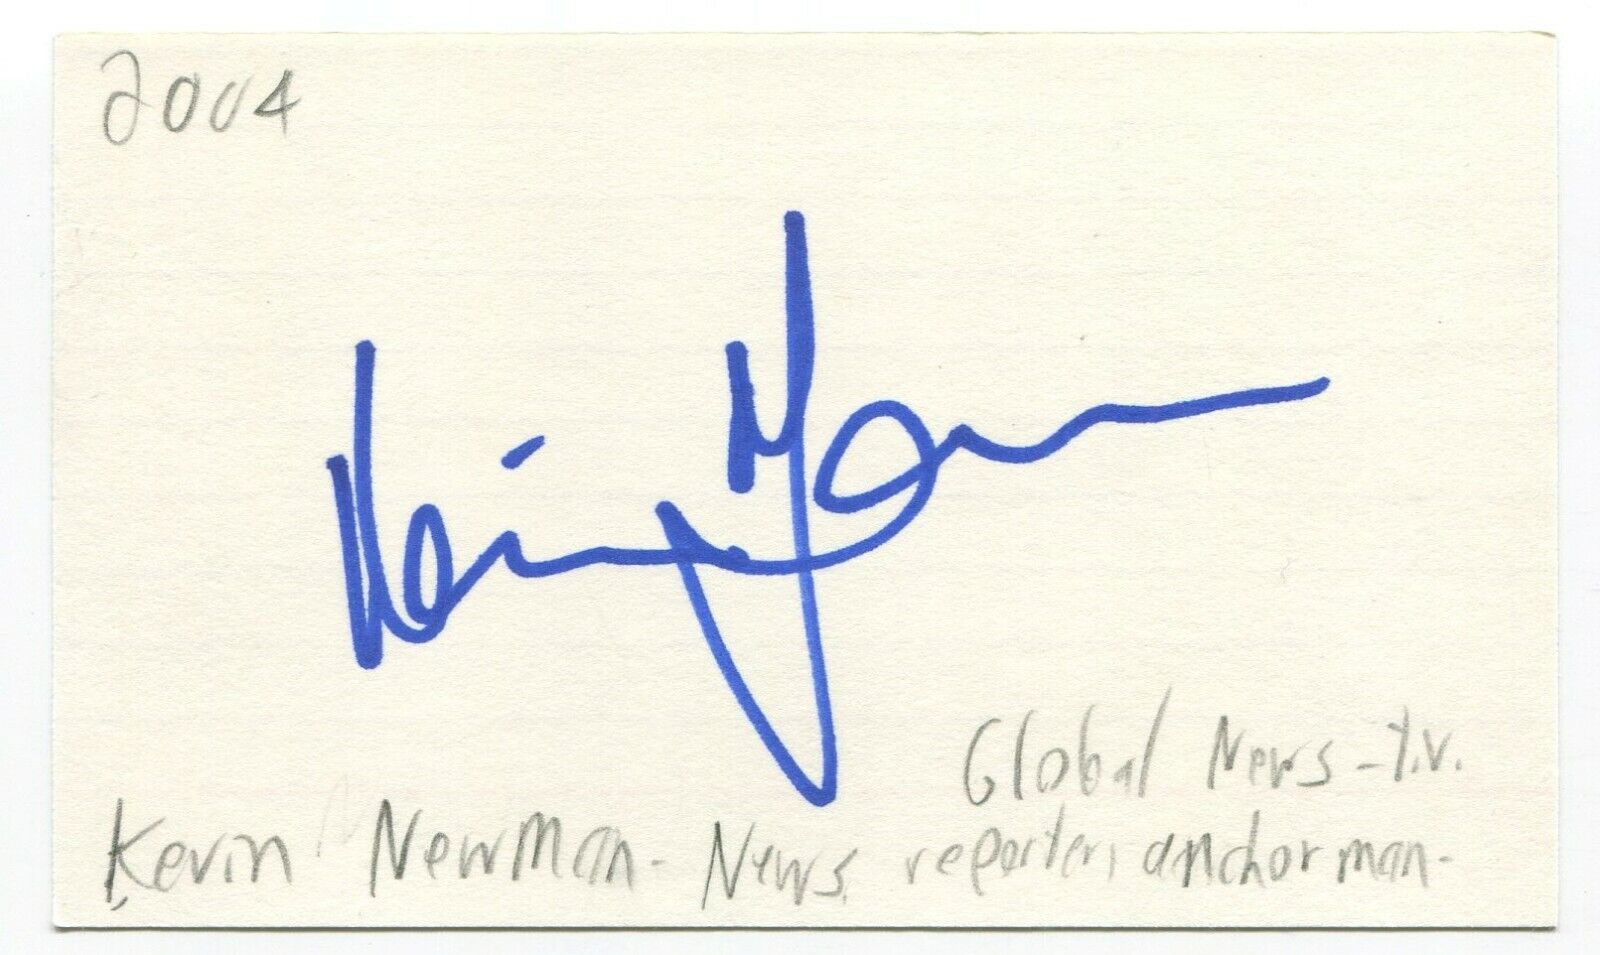 Kevin Newman Signed 3x5 Index Card Autographed Signature Journalist Broadcaster